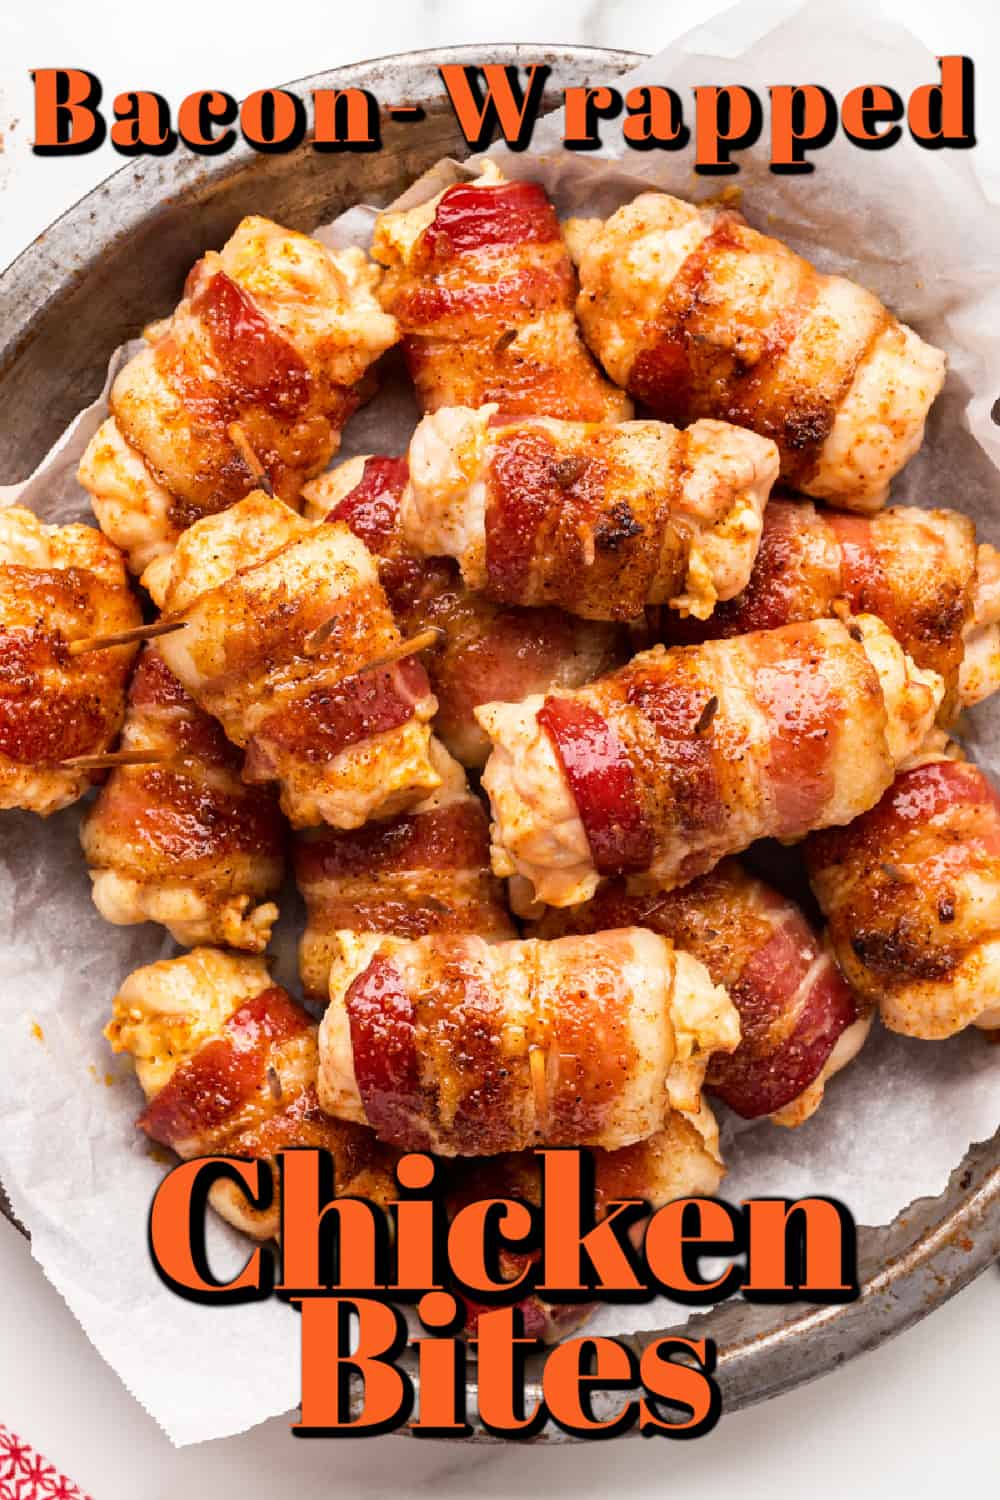 Bacon-Wrapped Chicken Bites Pin.